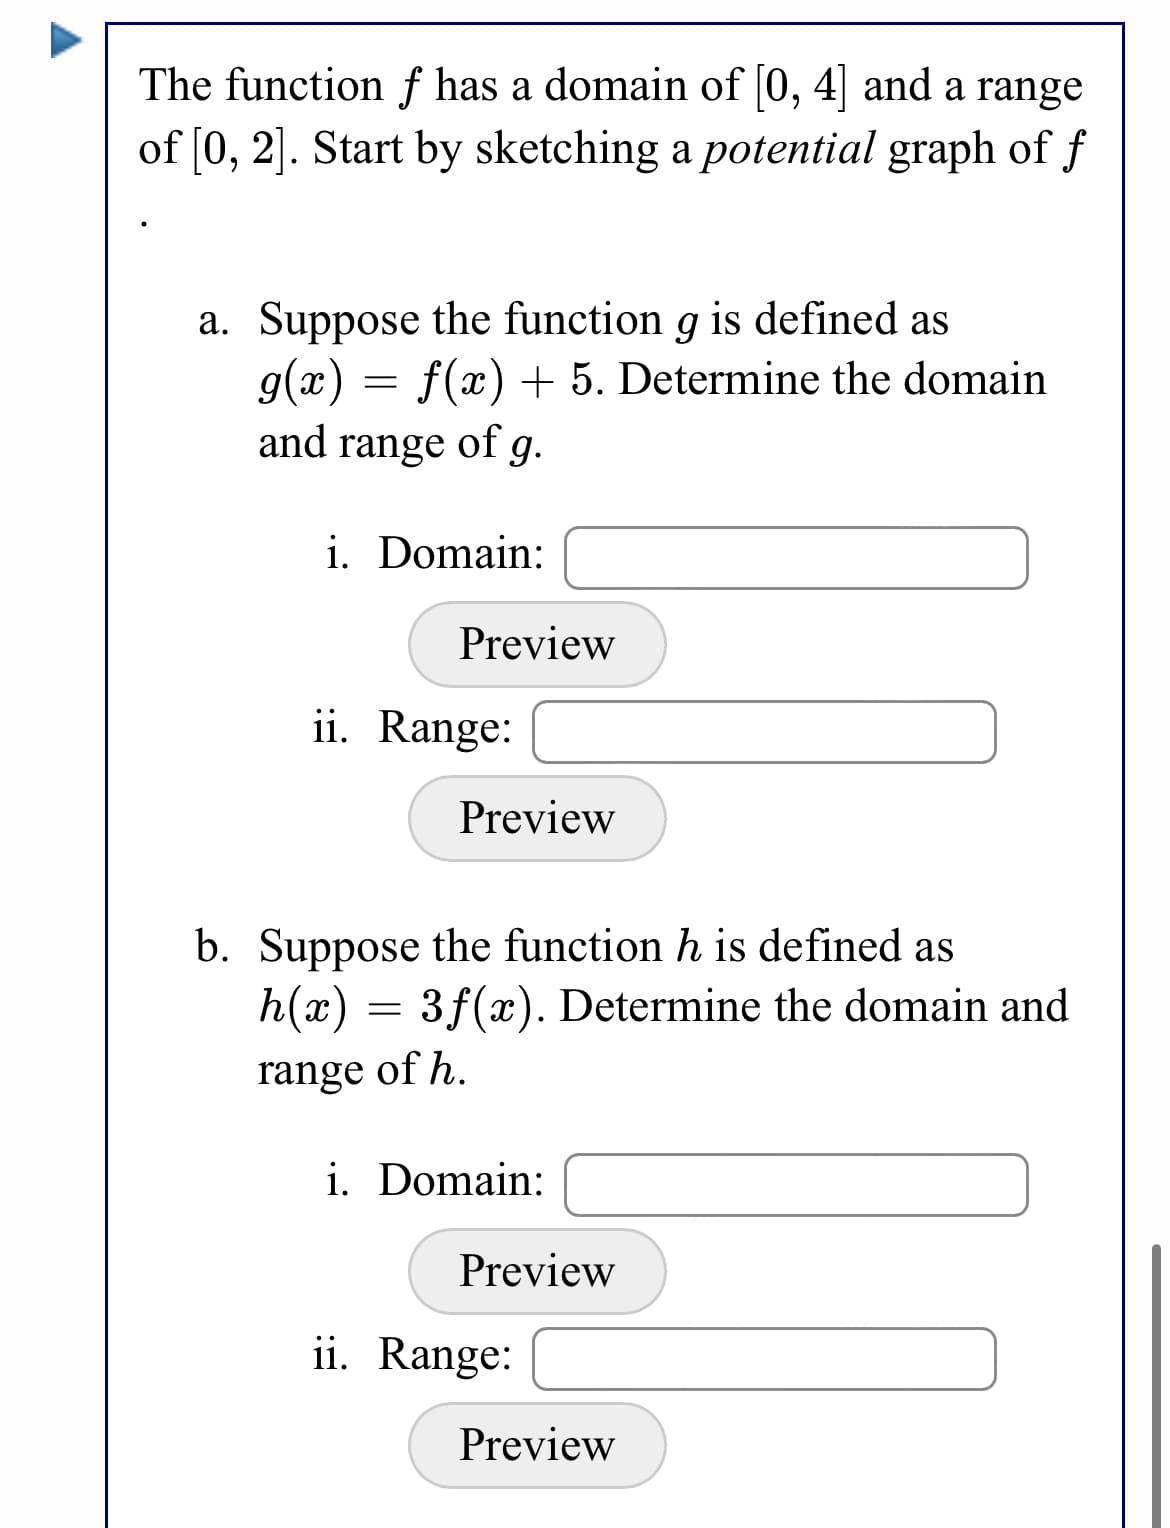 The function f has a domain of |0, 4| and a range
of [0, 2]. Start by sketching a potential graph of f
a. Suppose the function g is defined as
g(x) = f(x) + 5. Determine the domain
and range of g.
i. Domain:
Preview
ii. Range:
Preview
b. Suppose the function h is defined as
h(x) = 3f(x). Determine the domain and
range of h.
i. Domain:
Preview
ii. Range:
Preview
